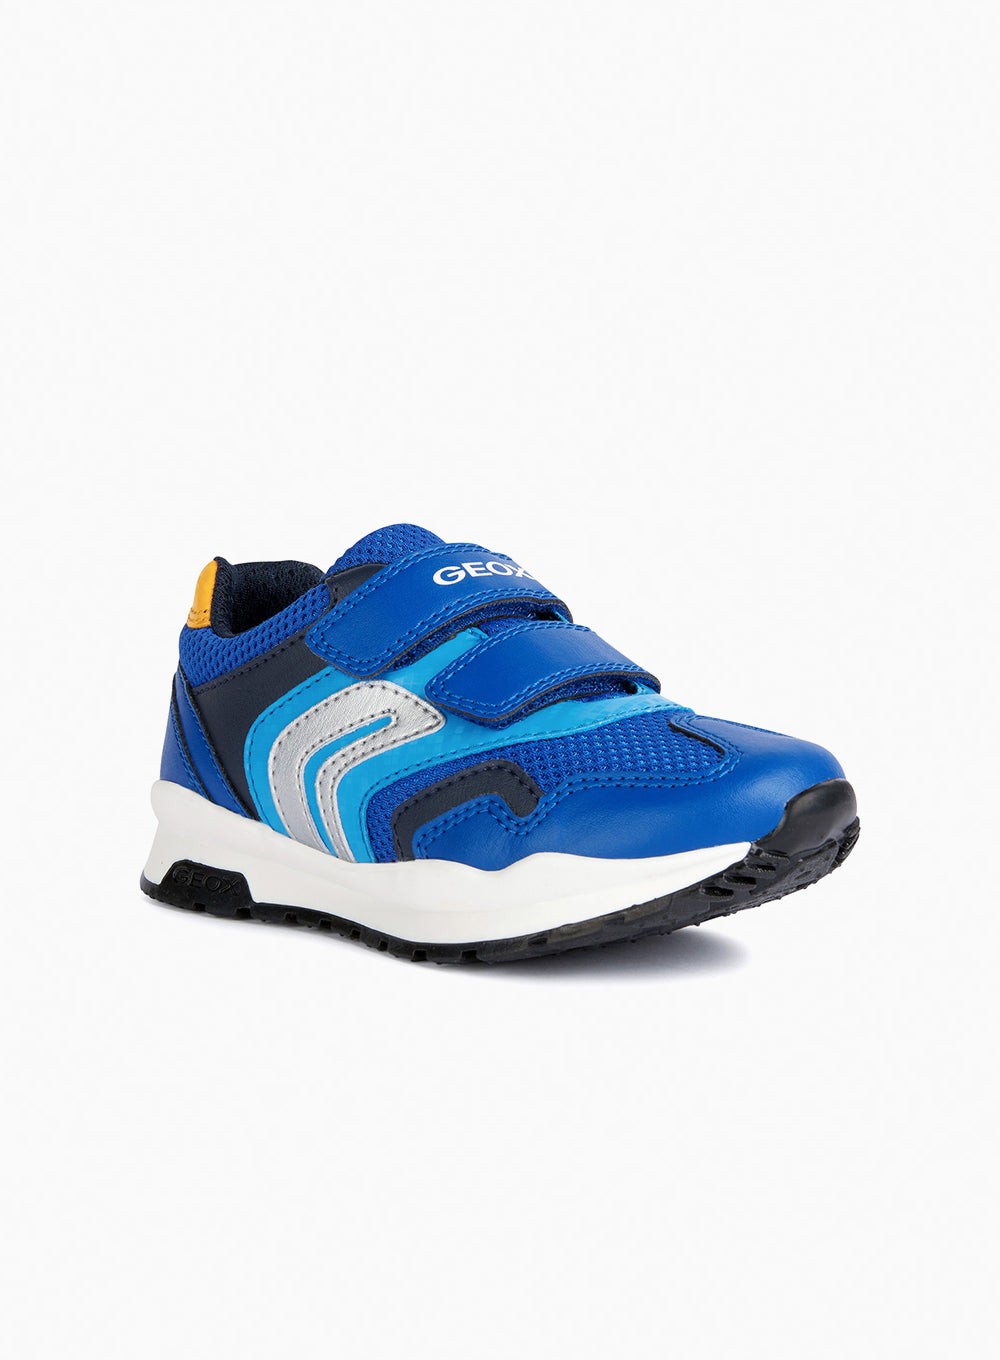 Buy Geox Jr Pavel Trainers in Royal Sky Trotters London